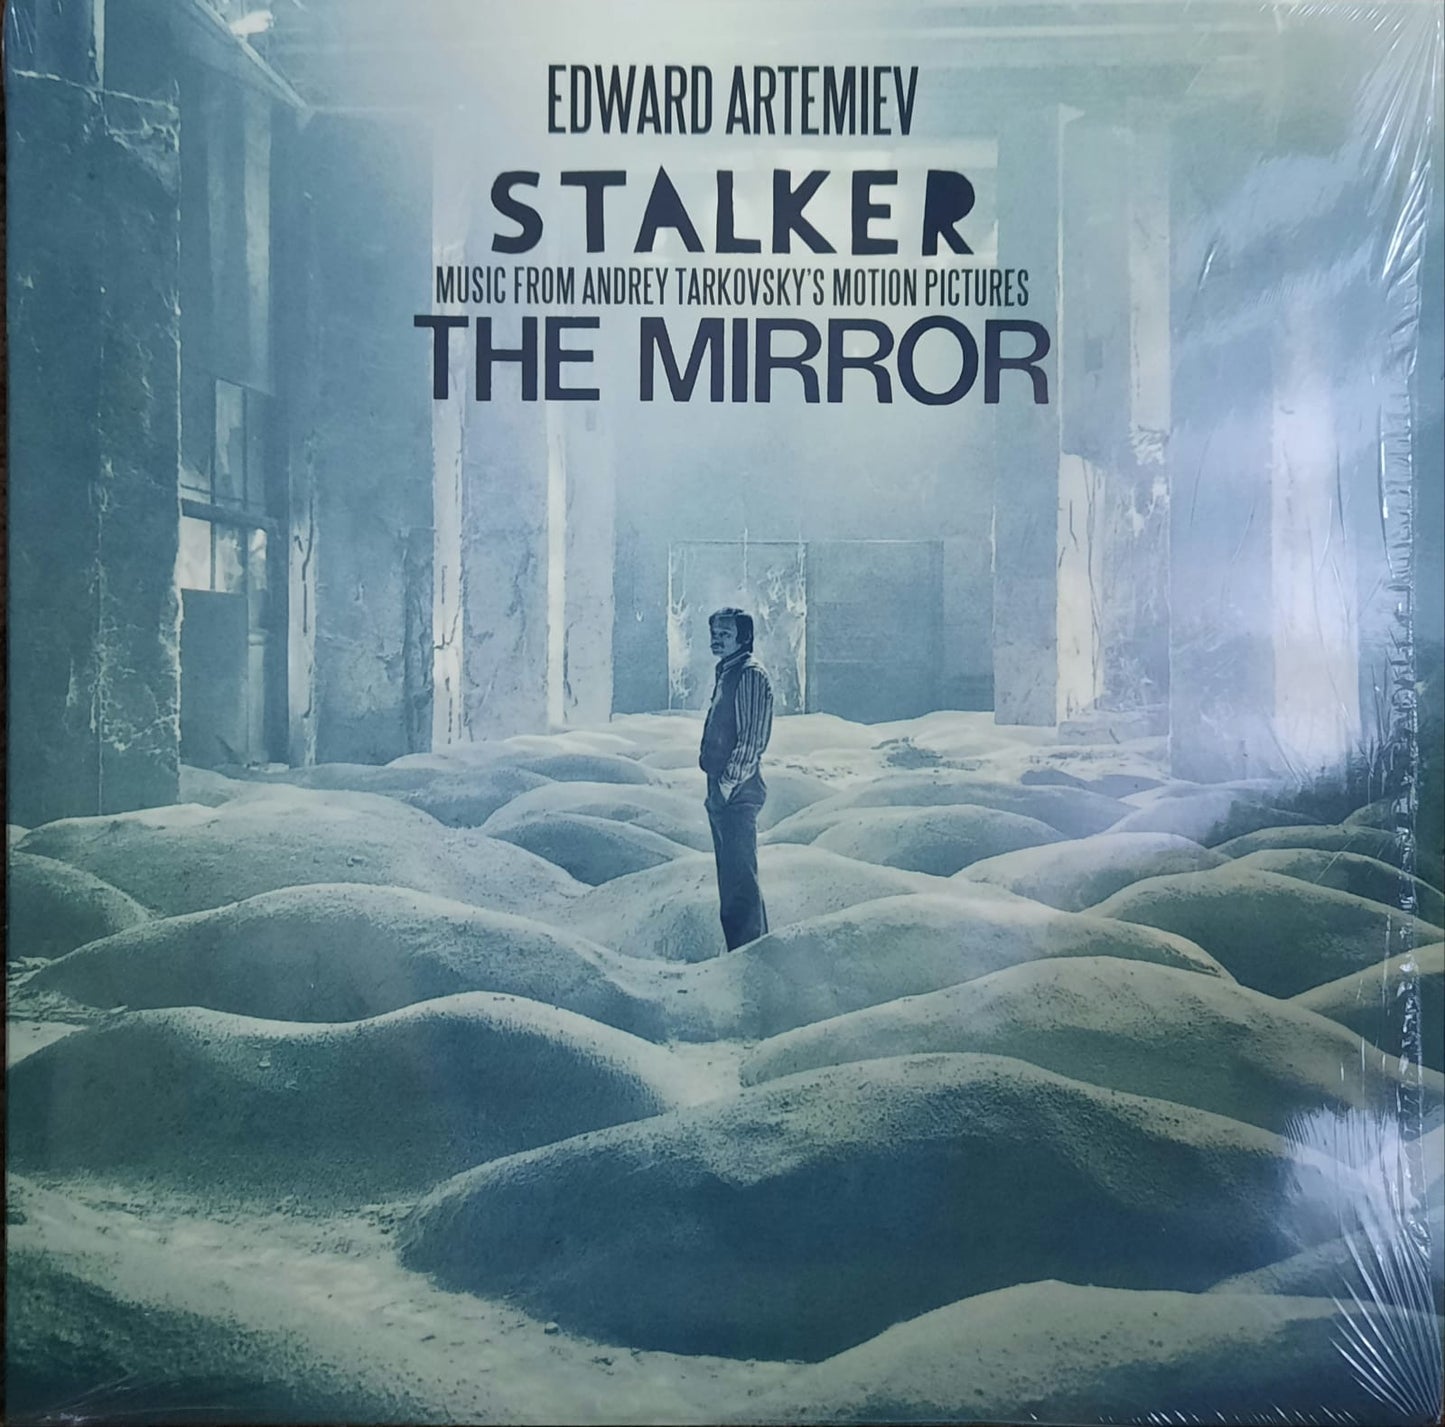 OST - Stalker / The Mirror - Music From Andrey Tarkovsky's Motion Pictures (LP, Rusia, 2013)